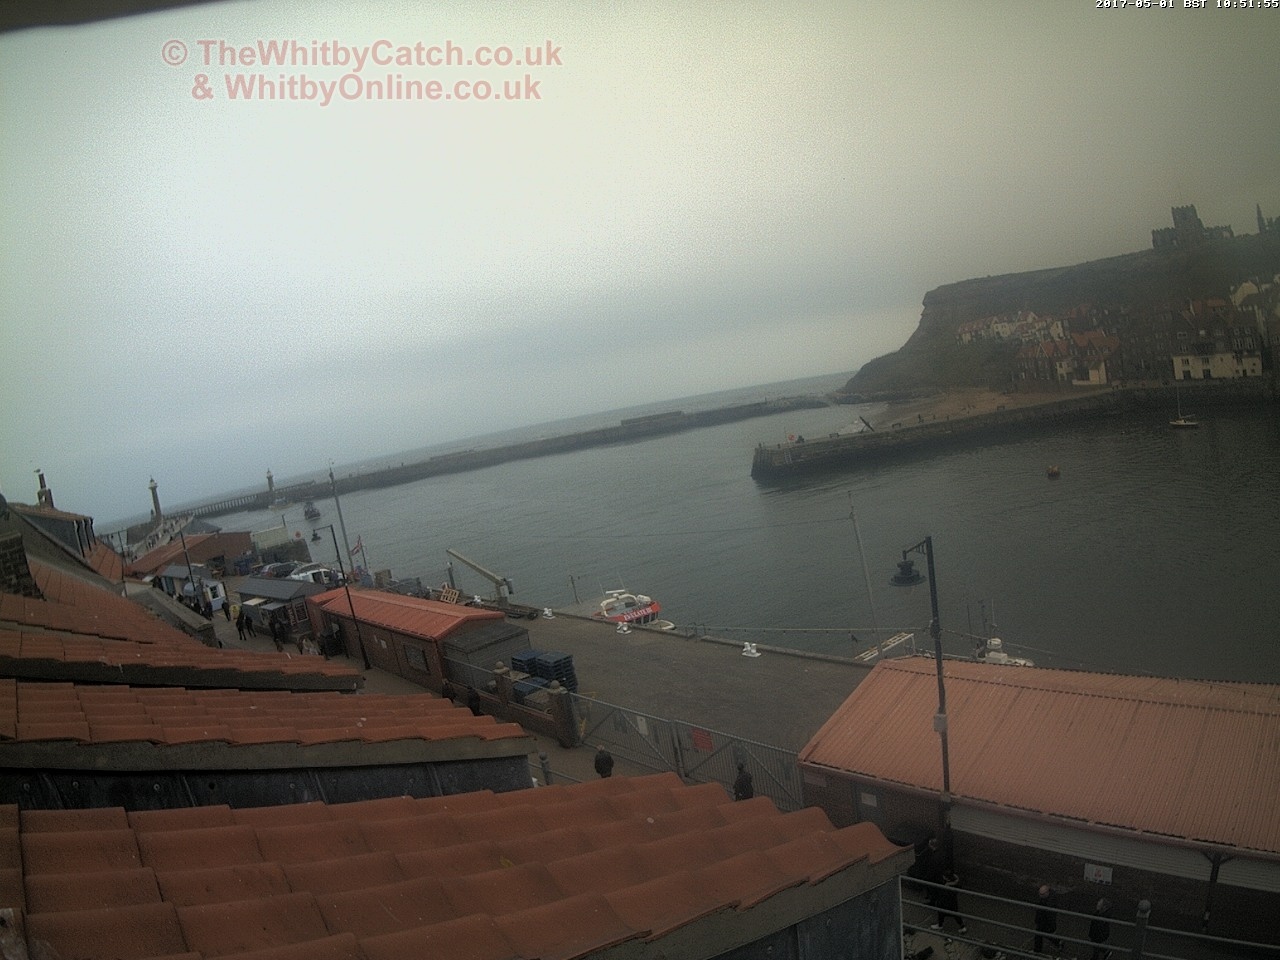 Whitby Mon 1st May 2017 10:52.